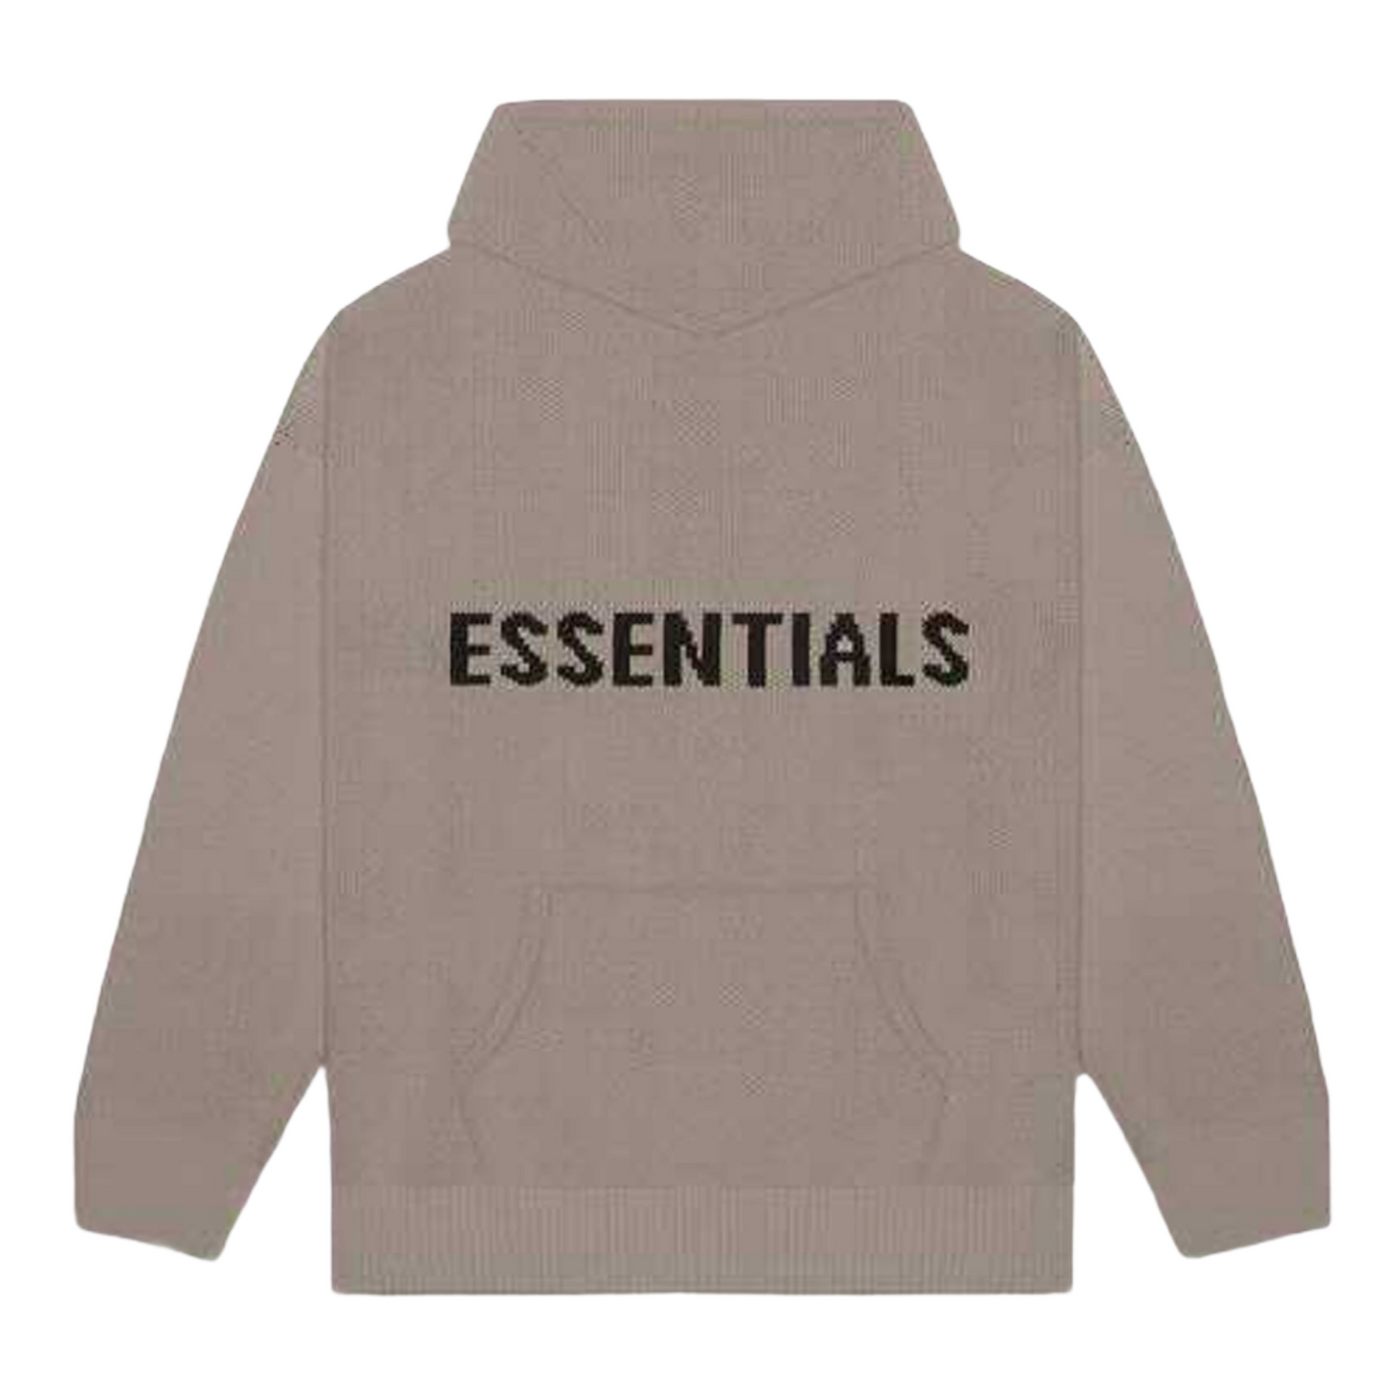 FEAR OF GOD ESSENTIALS KNIT TAUPE HOODIE